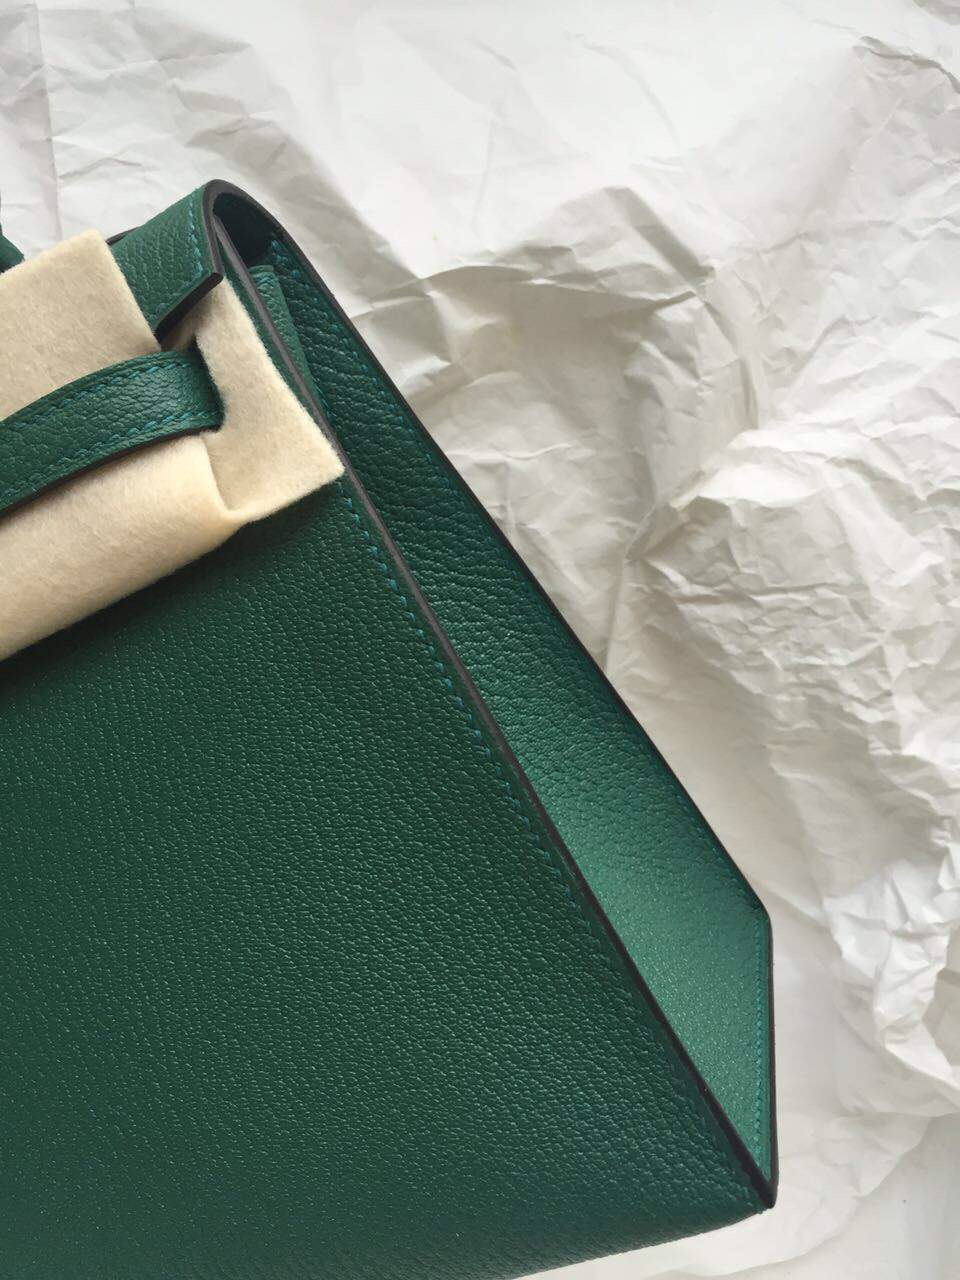 Hand Stitching Hermes Kelly Bag Sellier 25cm in Malachite Chevre Leather Silver Hardware